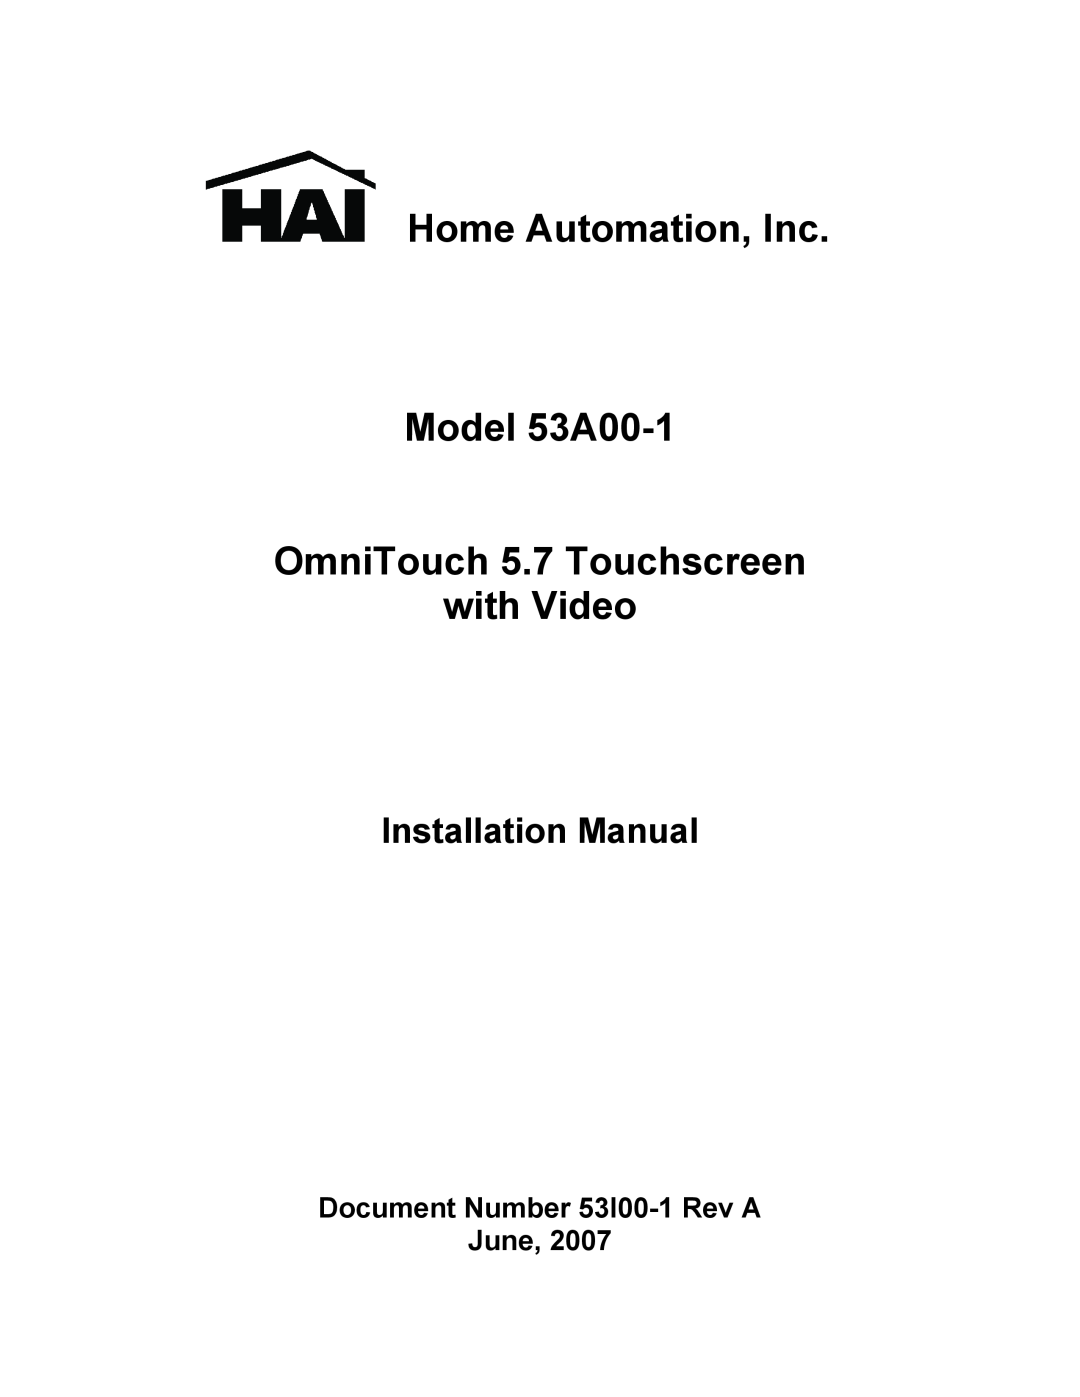 Home Automation 53A00-1 manual Technical Sheet 